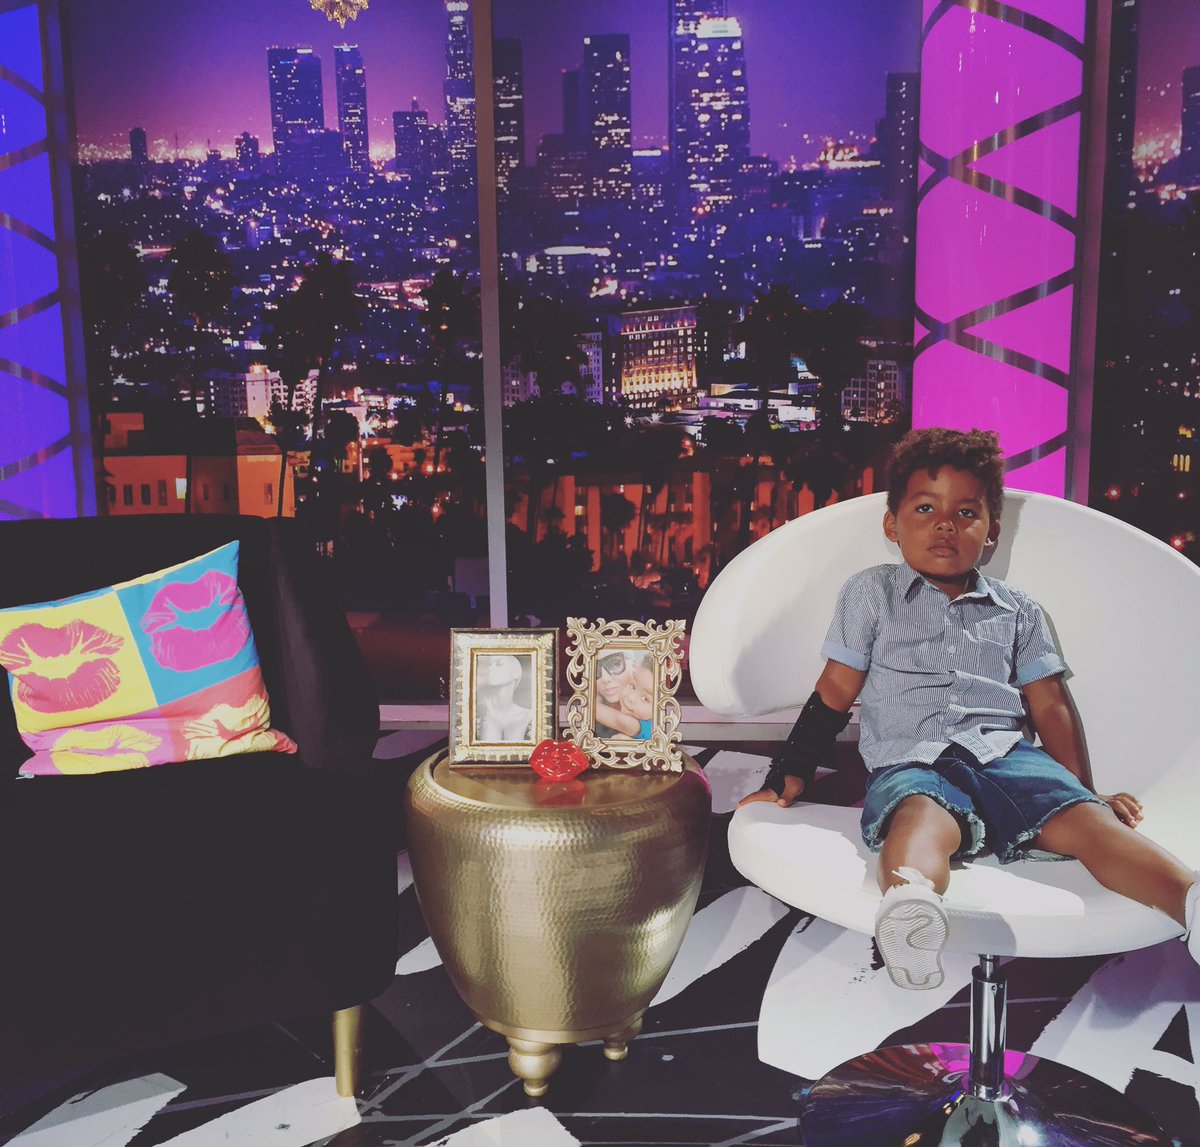 Pumpkin took over his Mommy's show ???? https://t.co/xITZv8GldS